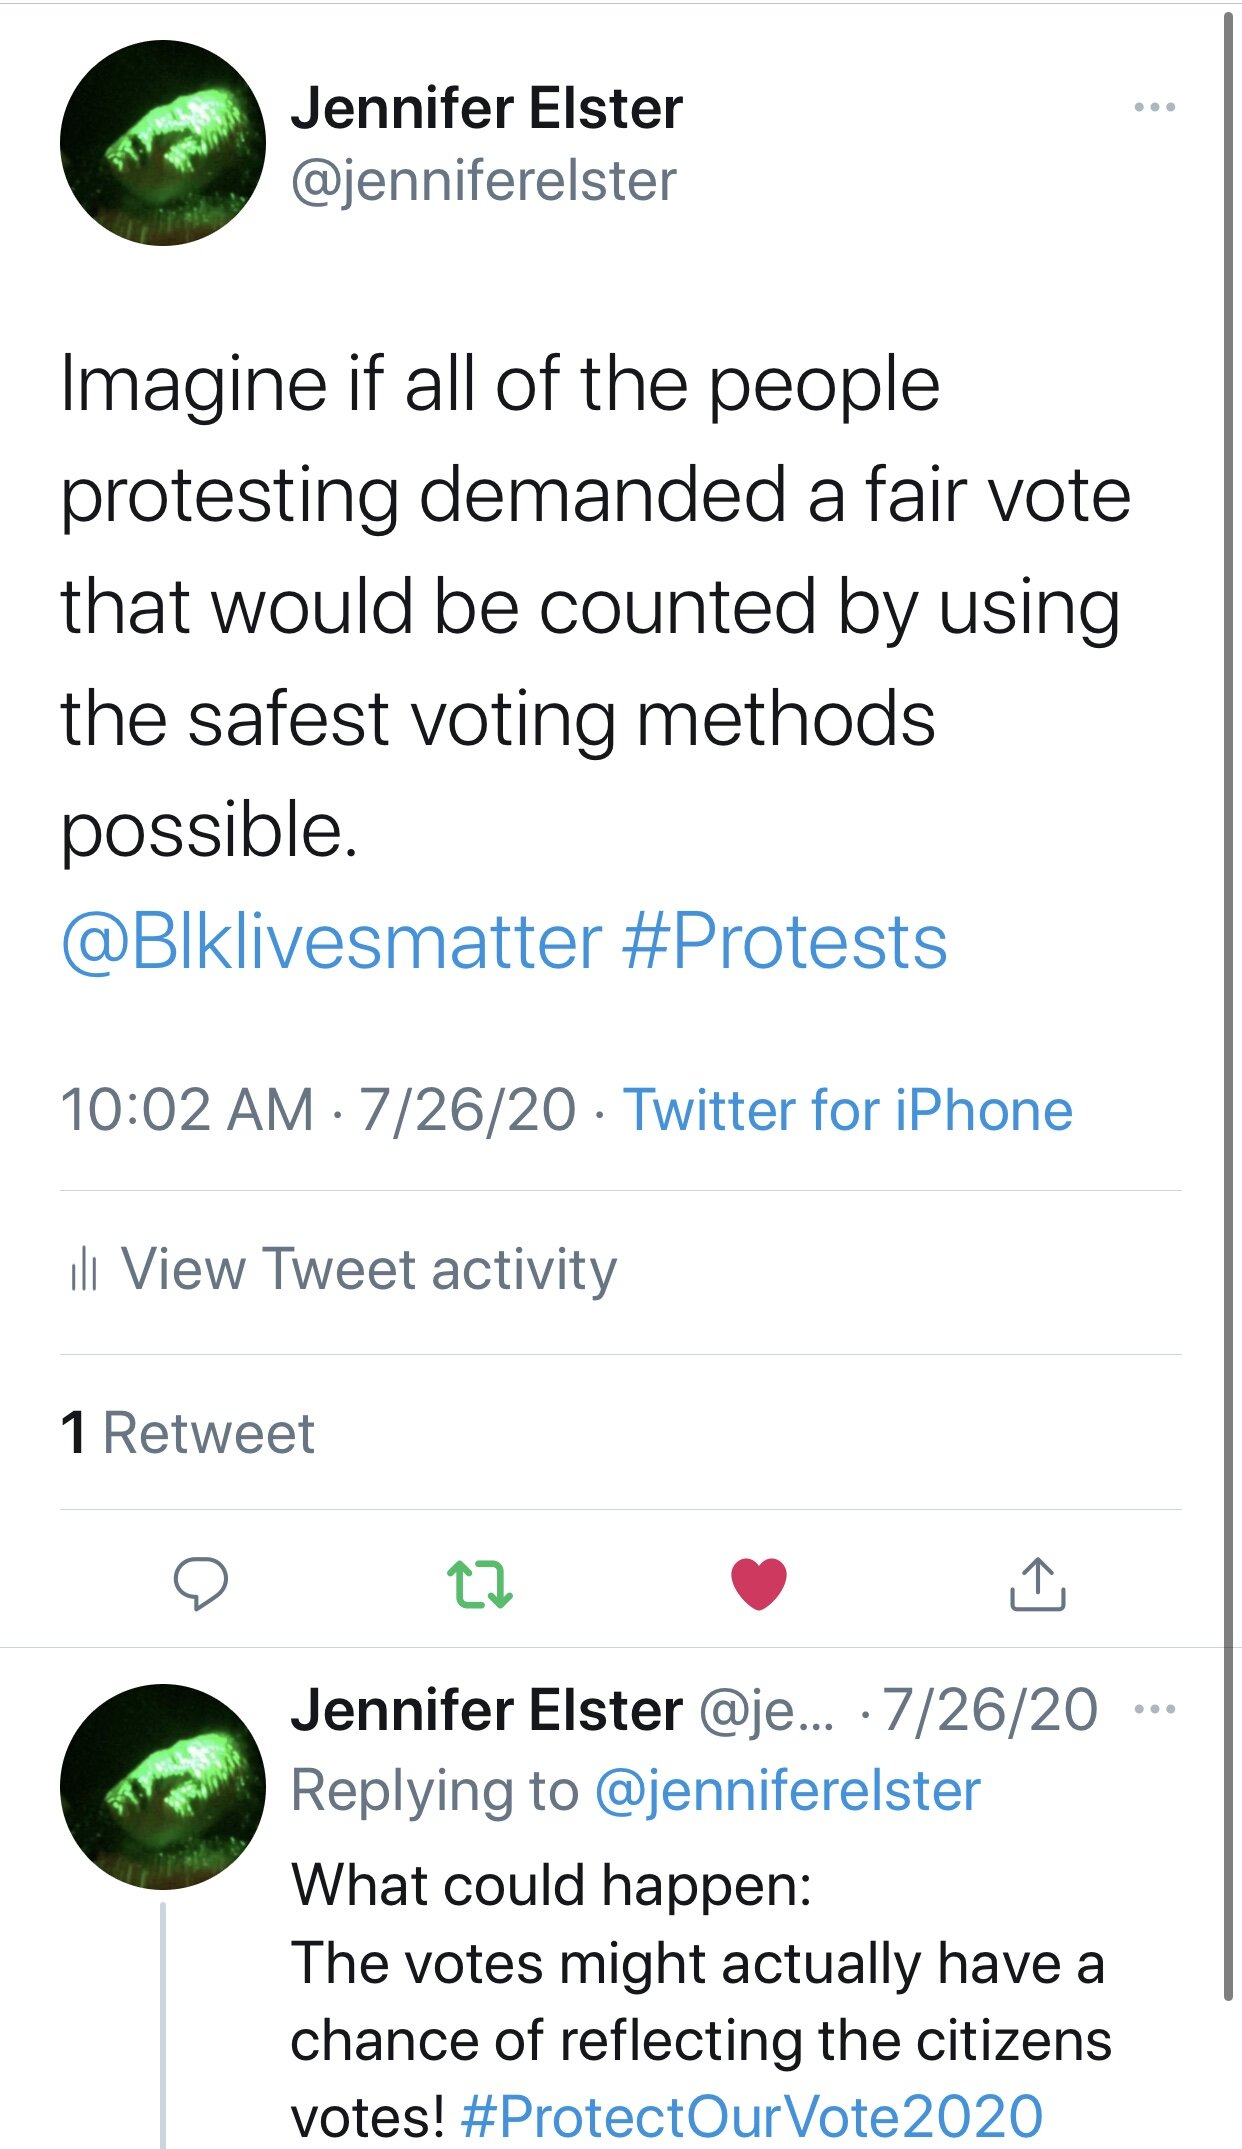 Jennifer Elster_Imagine if all of the people protesting_#ProtectOurVote2020 Nonpartisan Peace.jpg